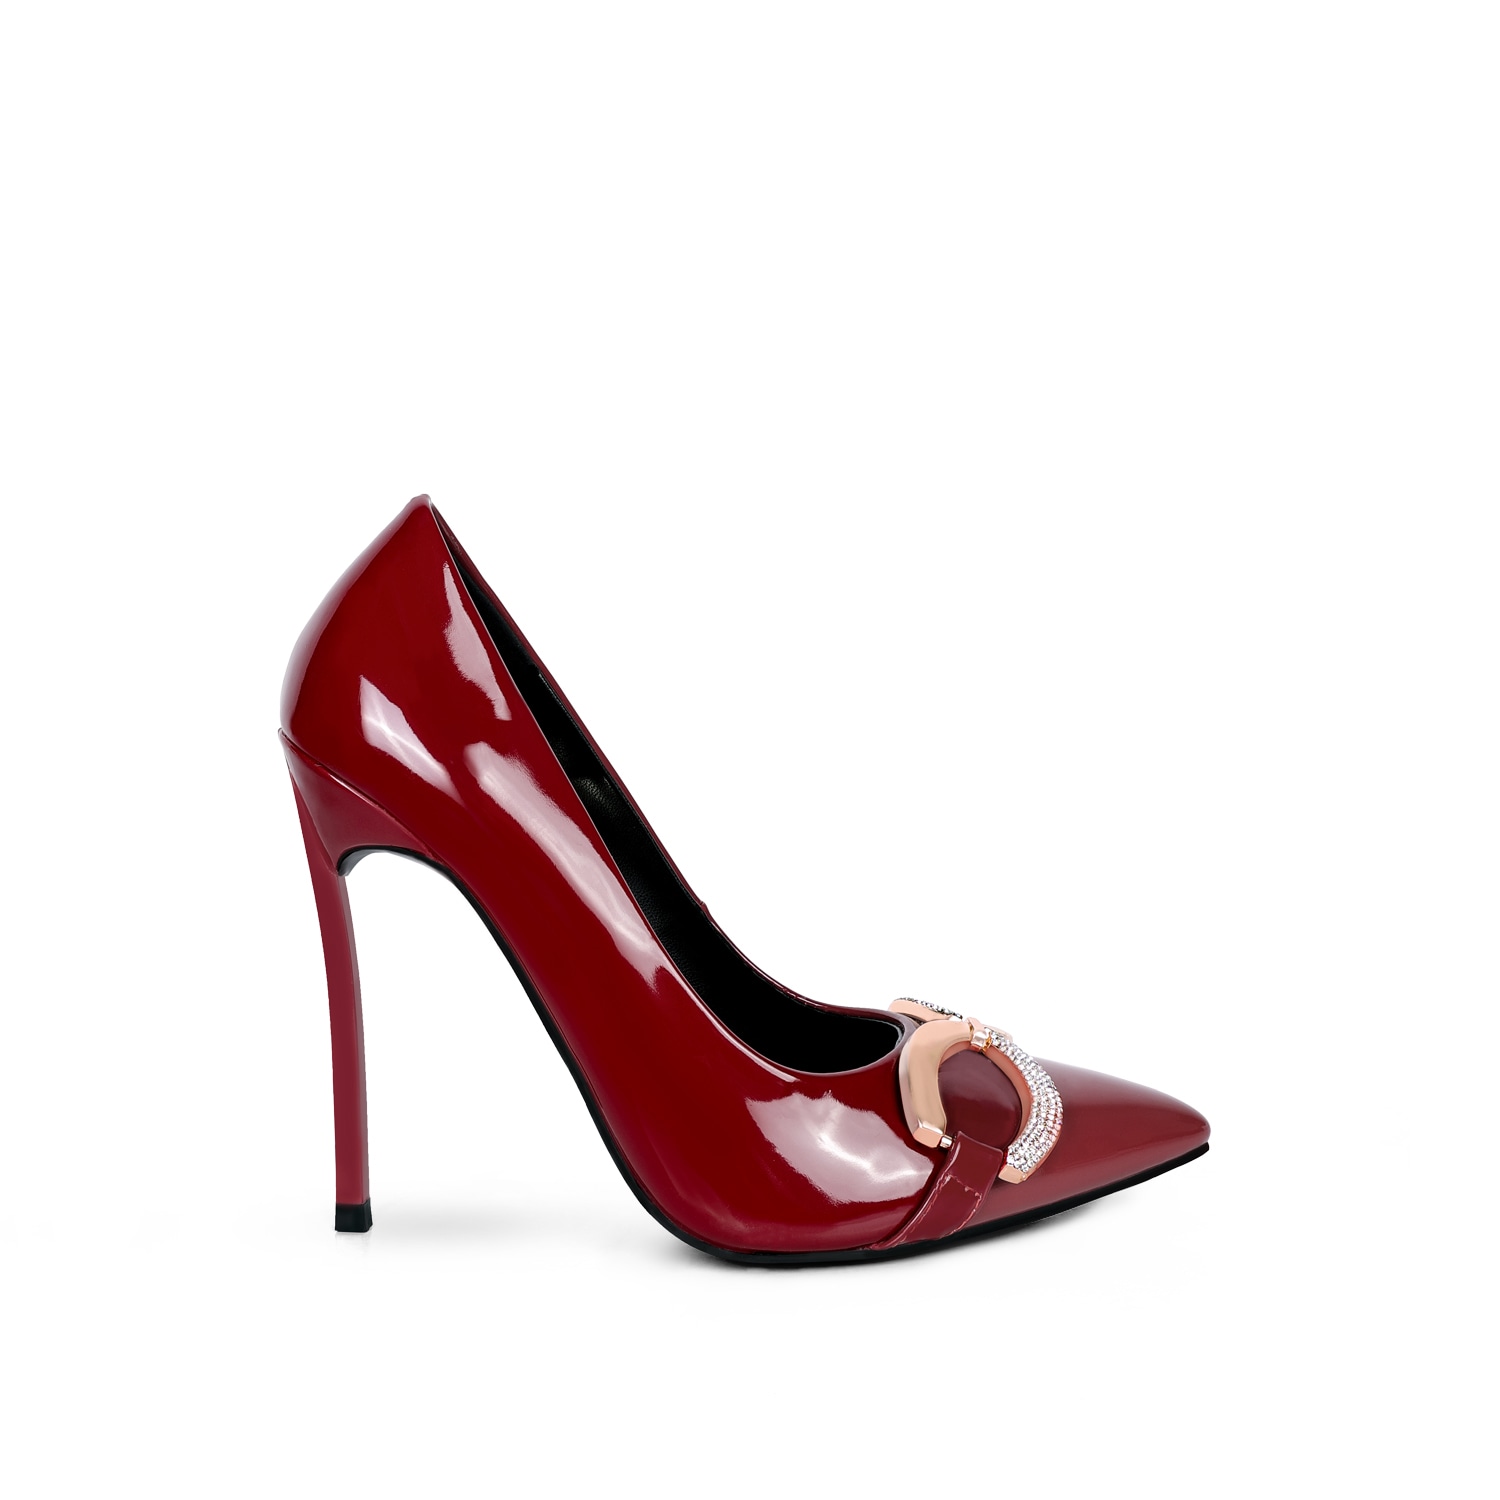 Women’s Red Cocktail Buckle Embellished Stiletto Pump Shoes In Burgundy 6 Uk Rag & Co.